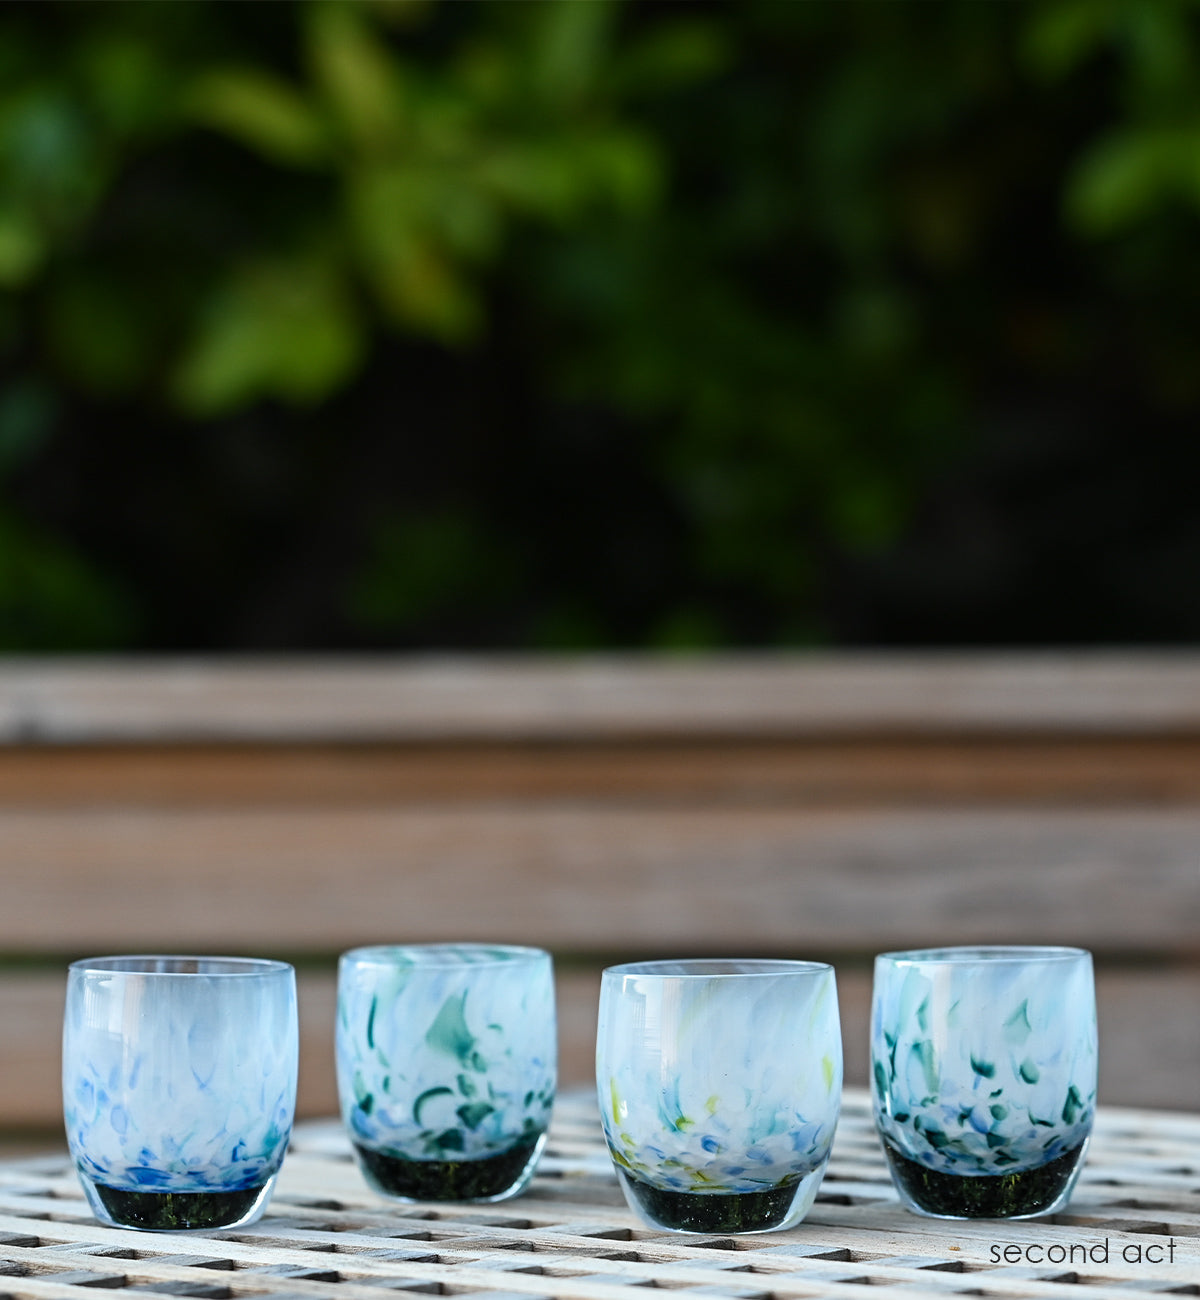  second act hand-blown glass votive candle holder made from recycled glass from 43 colors.